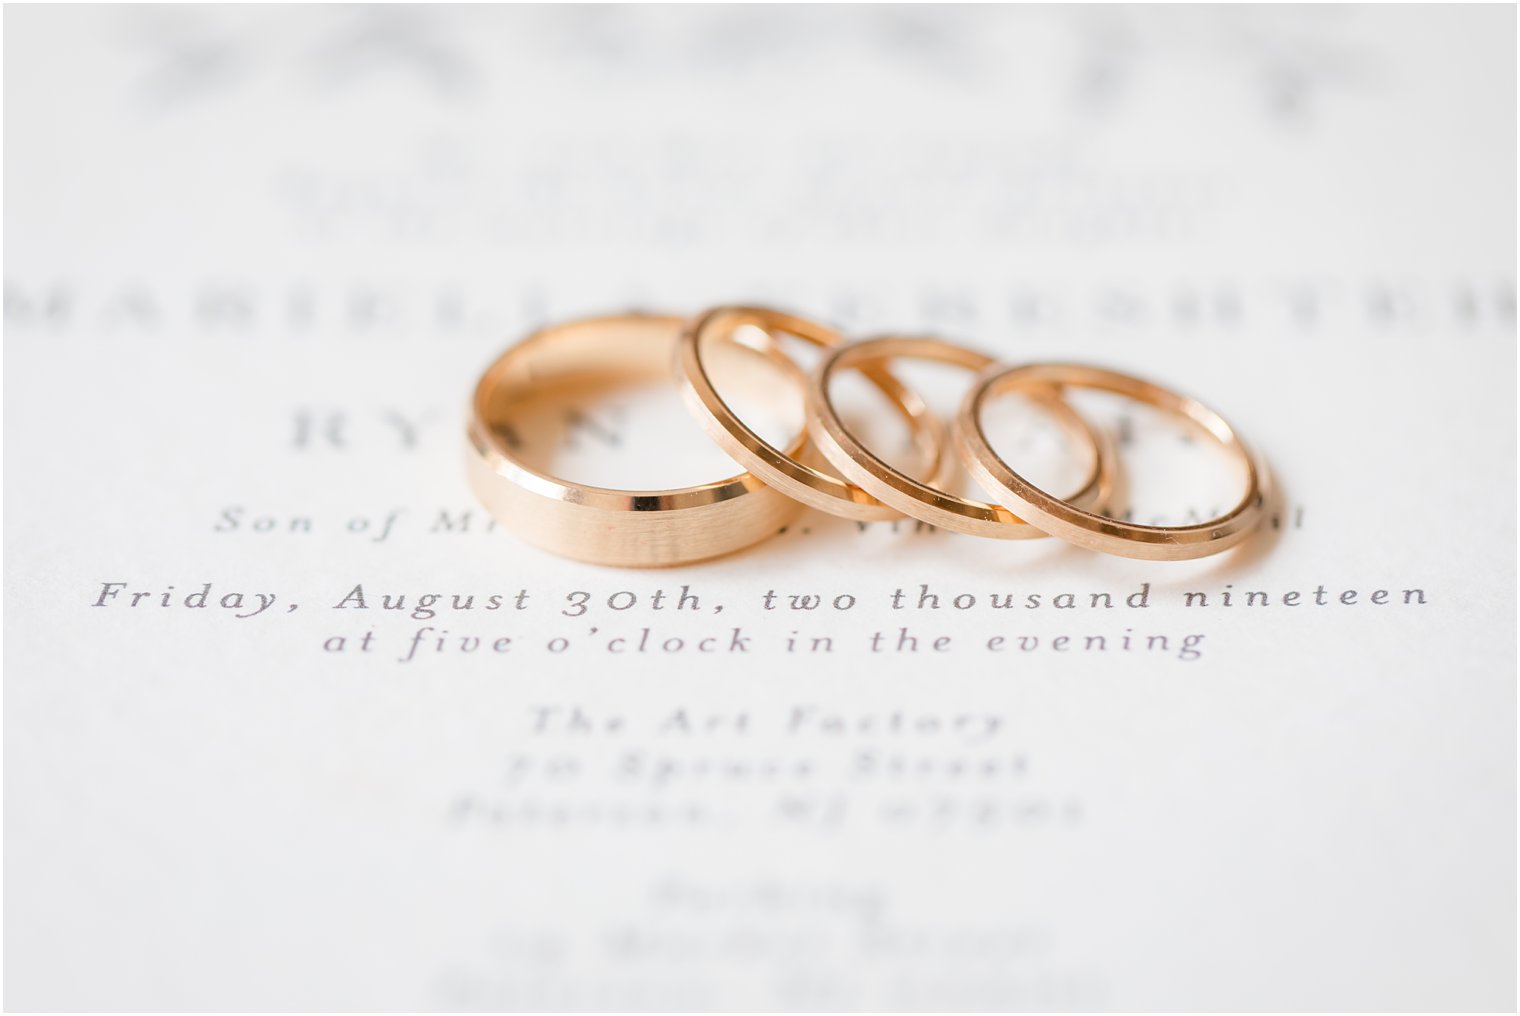 Gold wedding bands on invitation at Art Factory Studios in Paterson, NJ